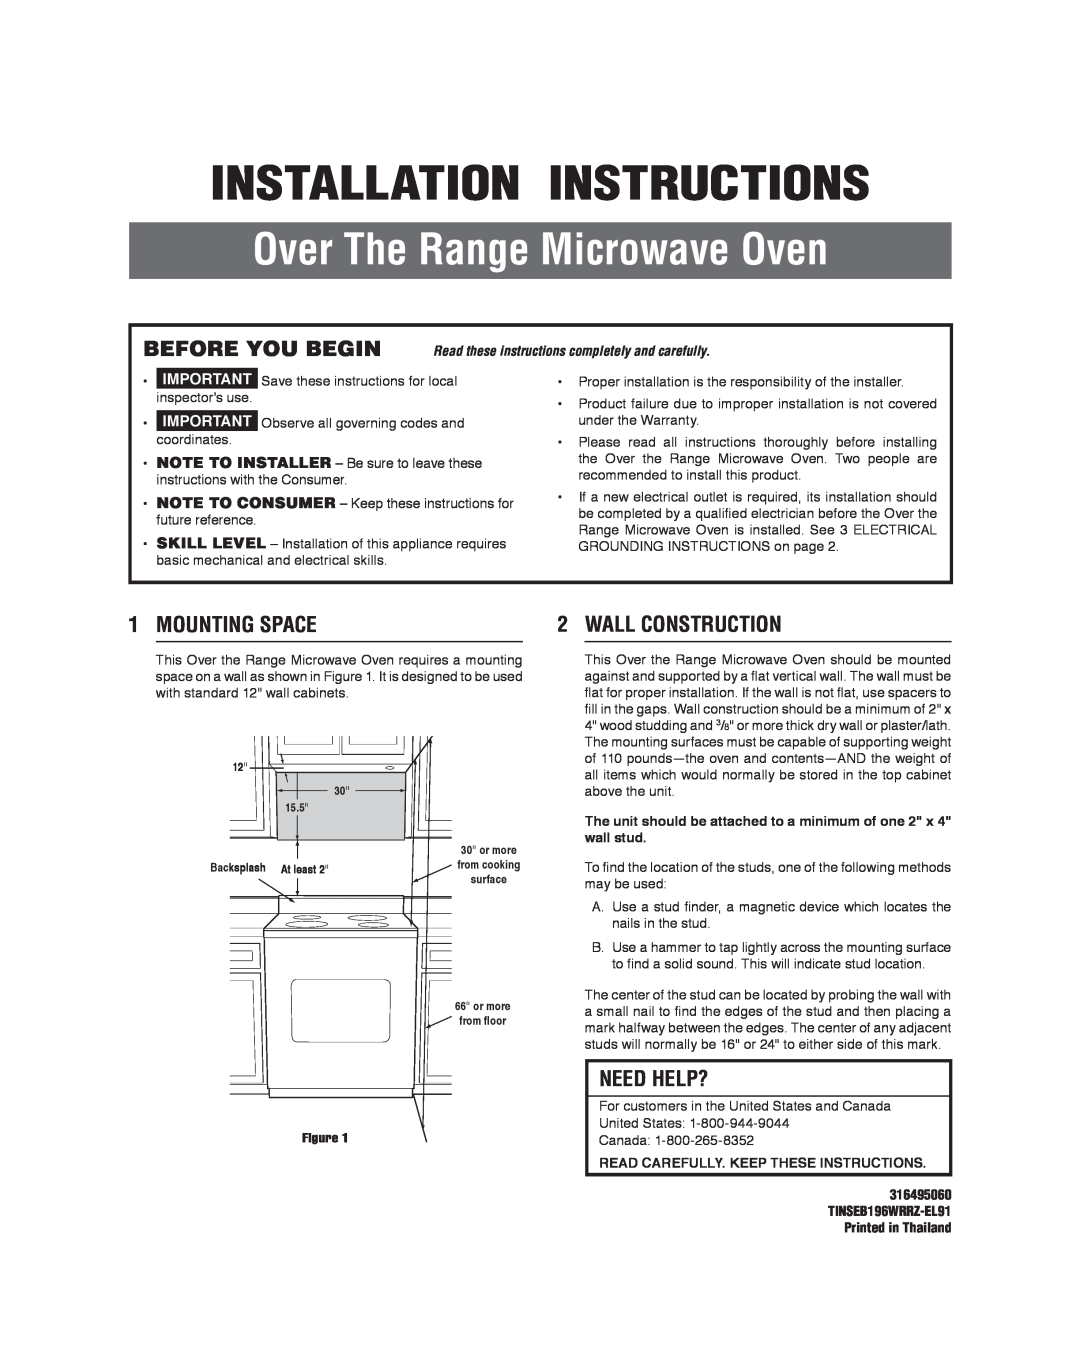 Frigidaire 316495060 manual Installation Instructions, Over The Range Microwave Oven, Before You Begin, Mounting Space 